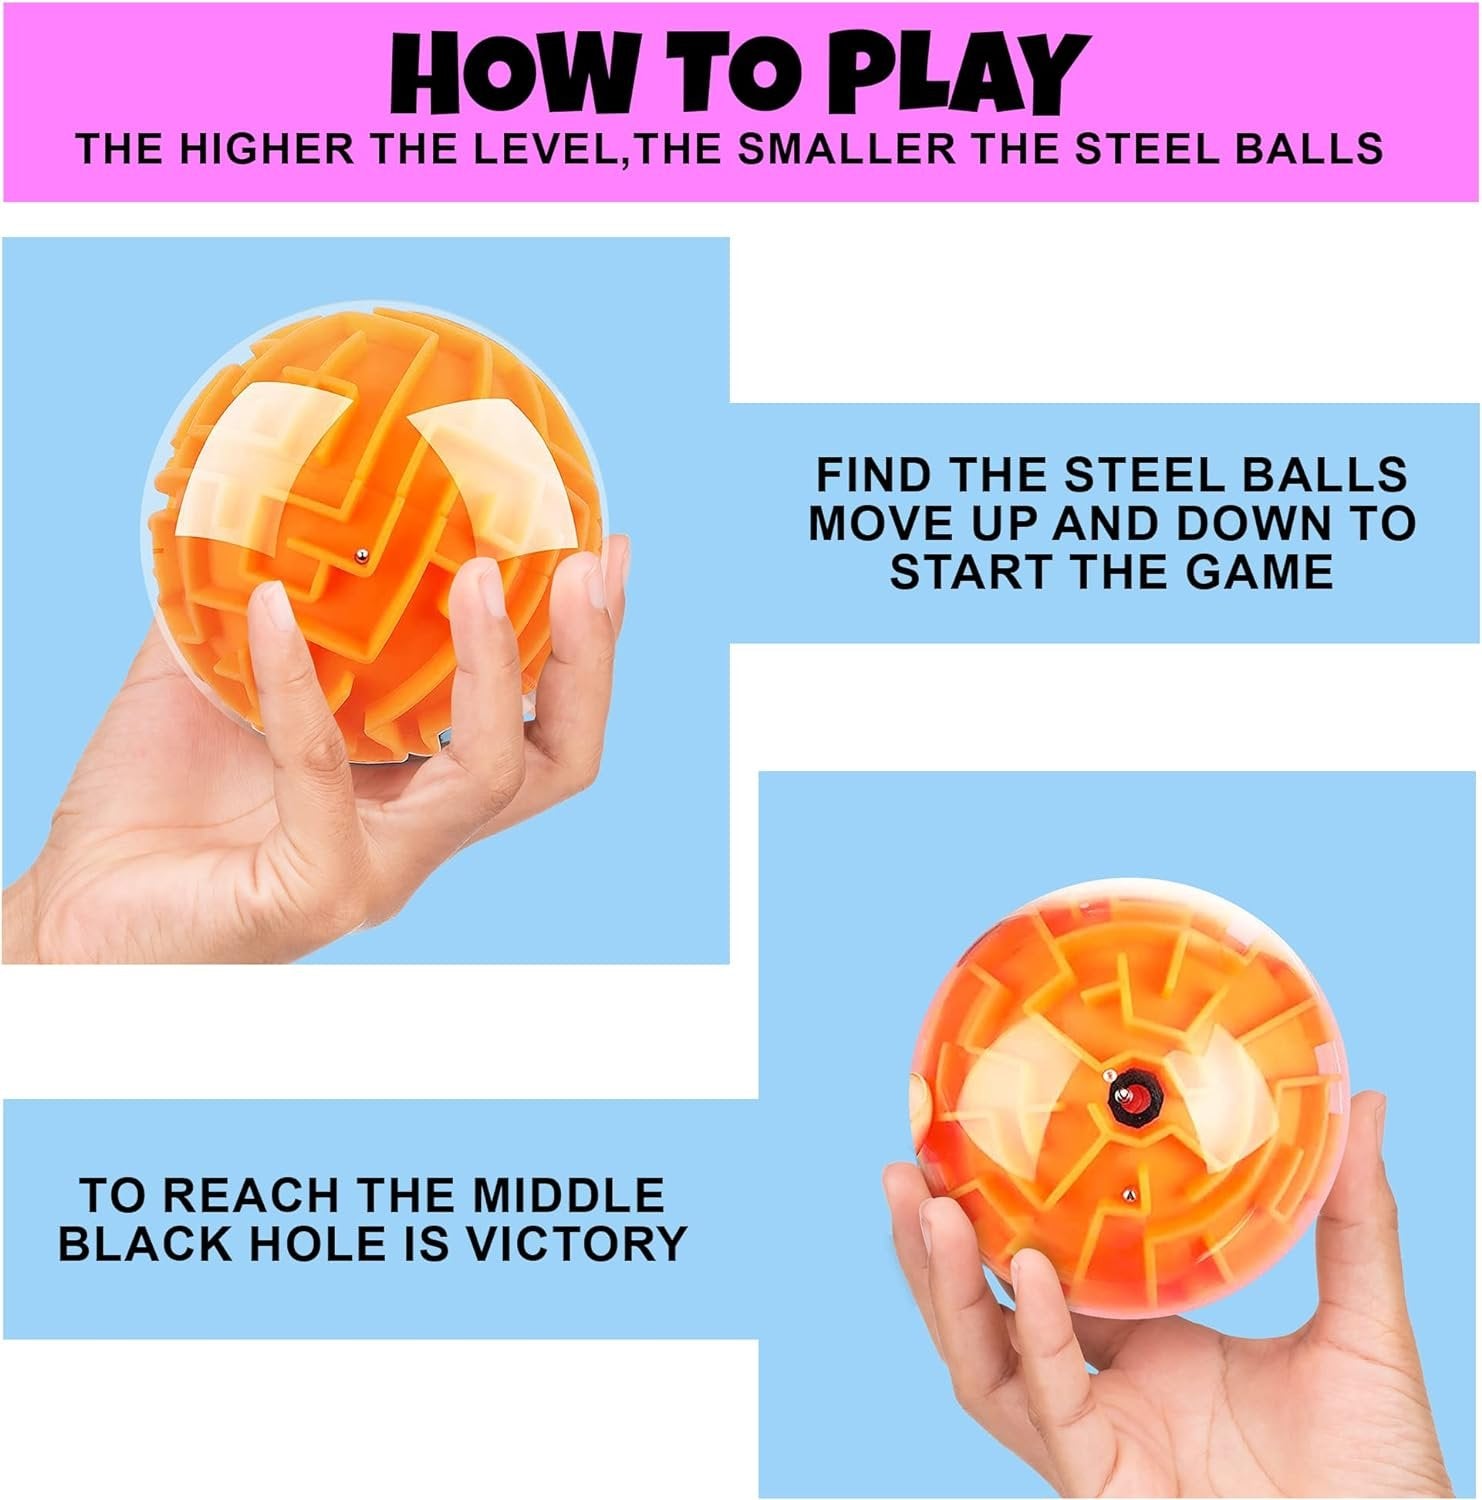 3D Maze Ball Puzzle Games for Kids, Set of 4, Includes 4 Brain Teaser Puzzles